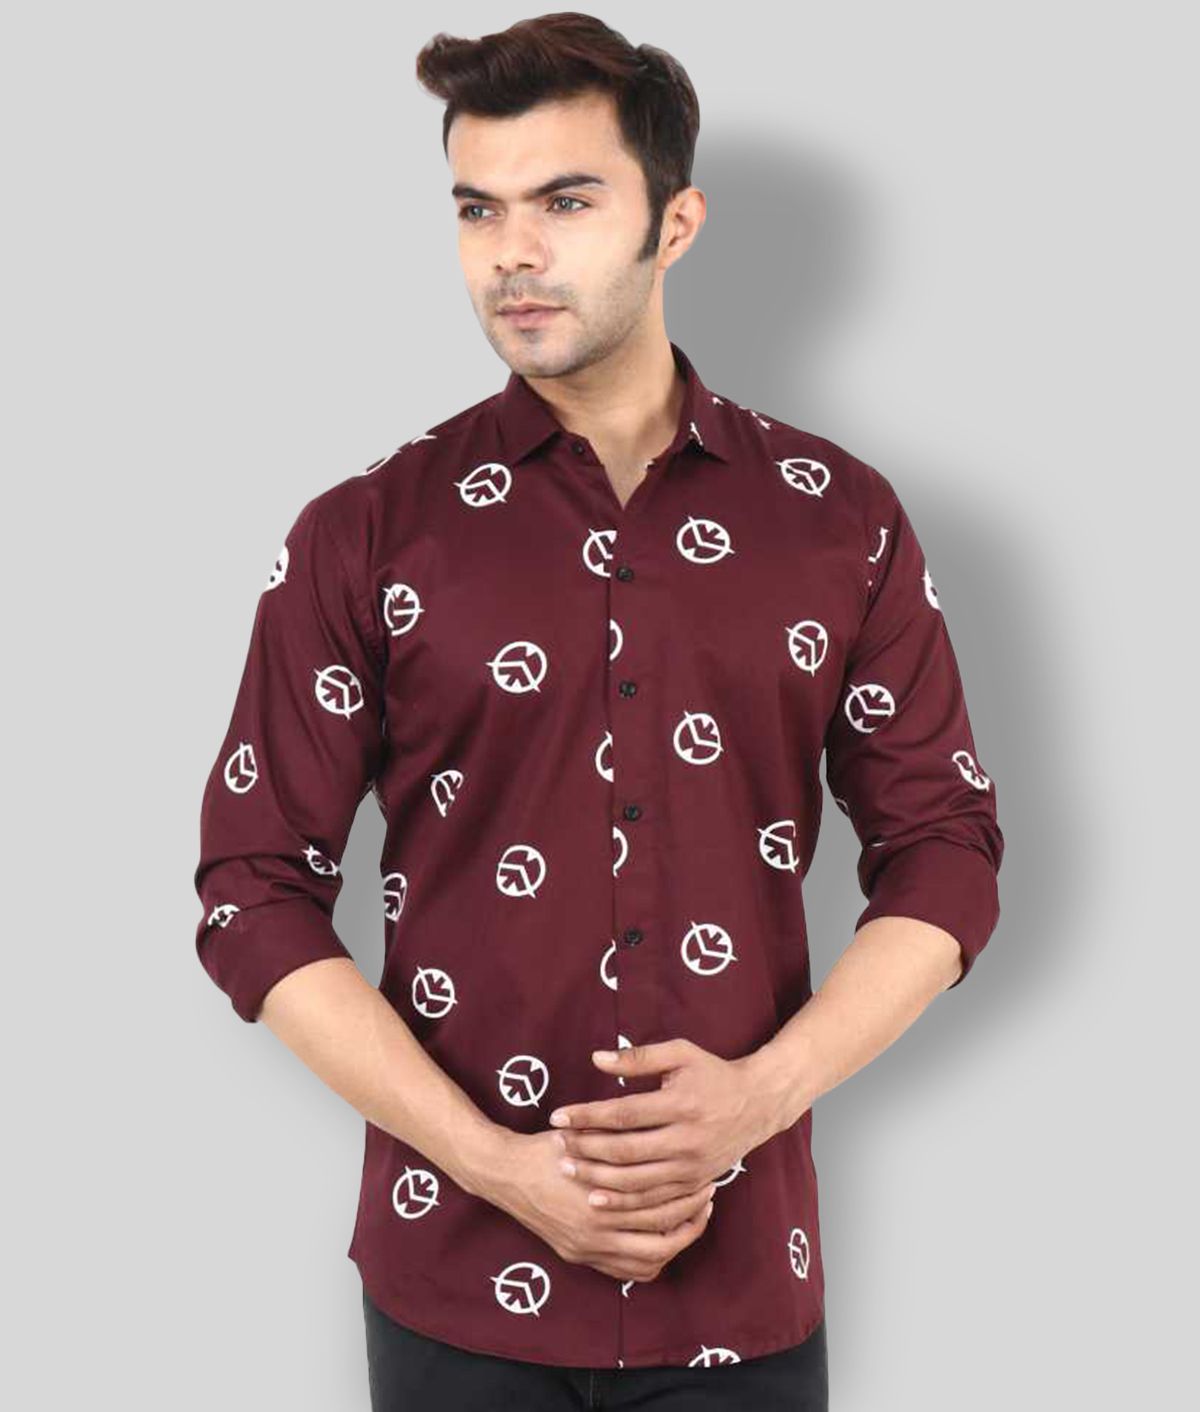 P&V CREATIONS - Maroon Cotton Blend Regular Fit Men's Casual Shirt (Pack of 1)